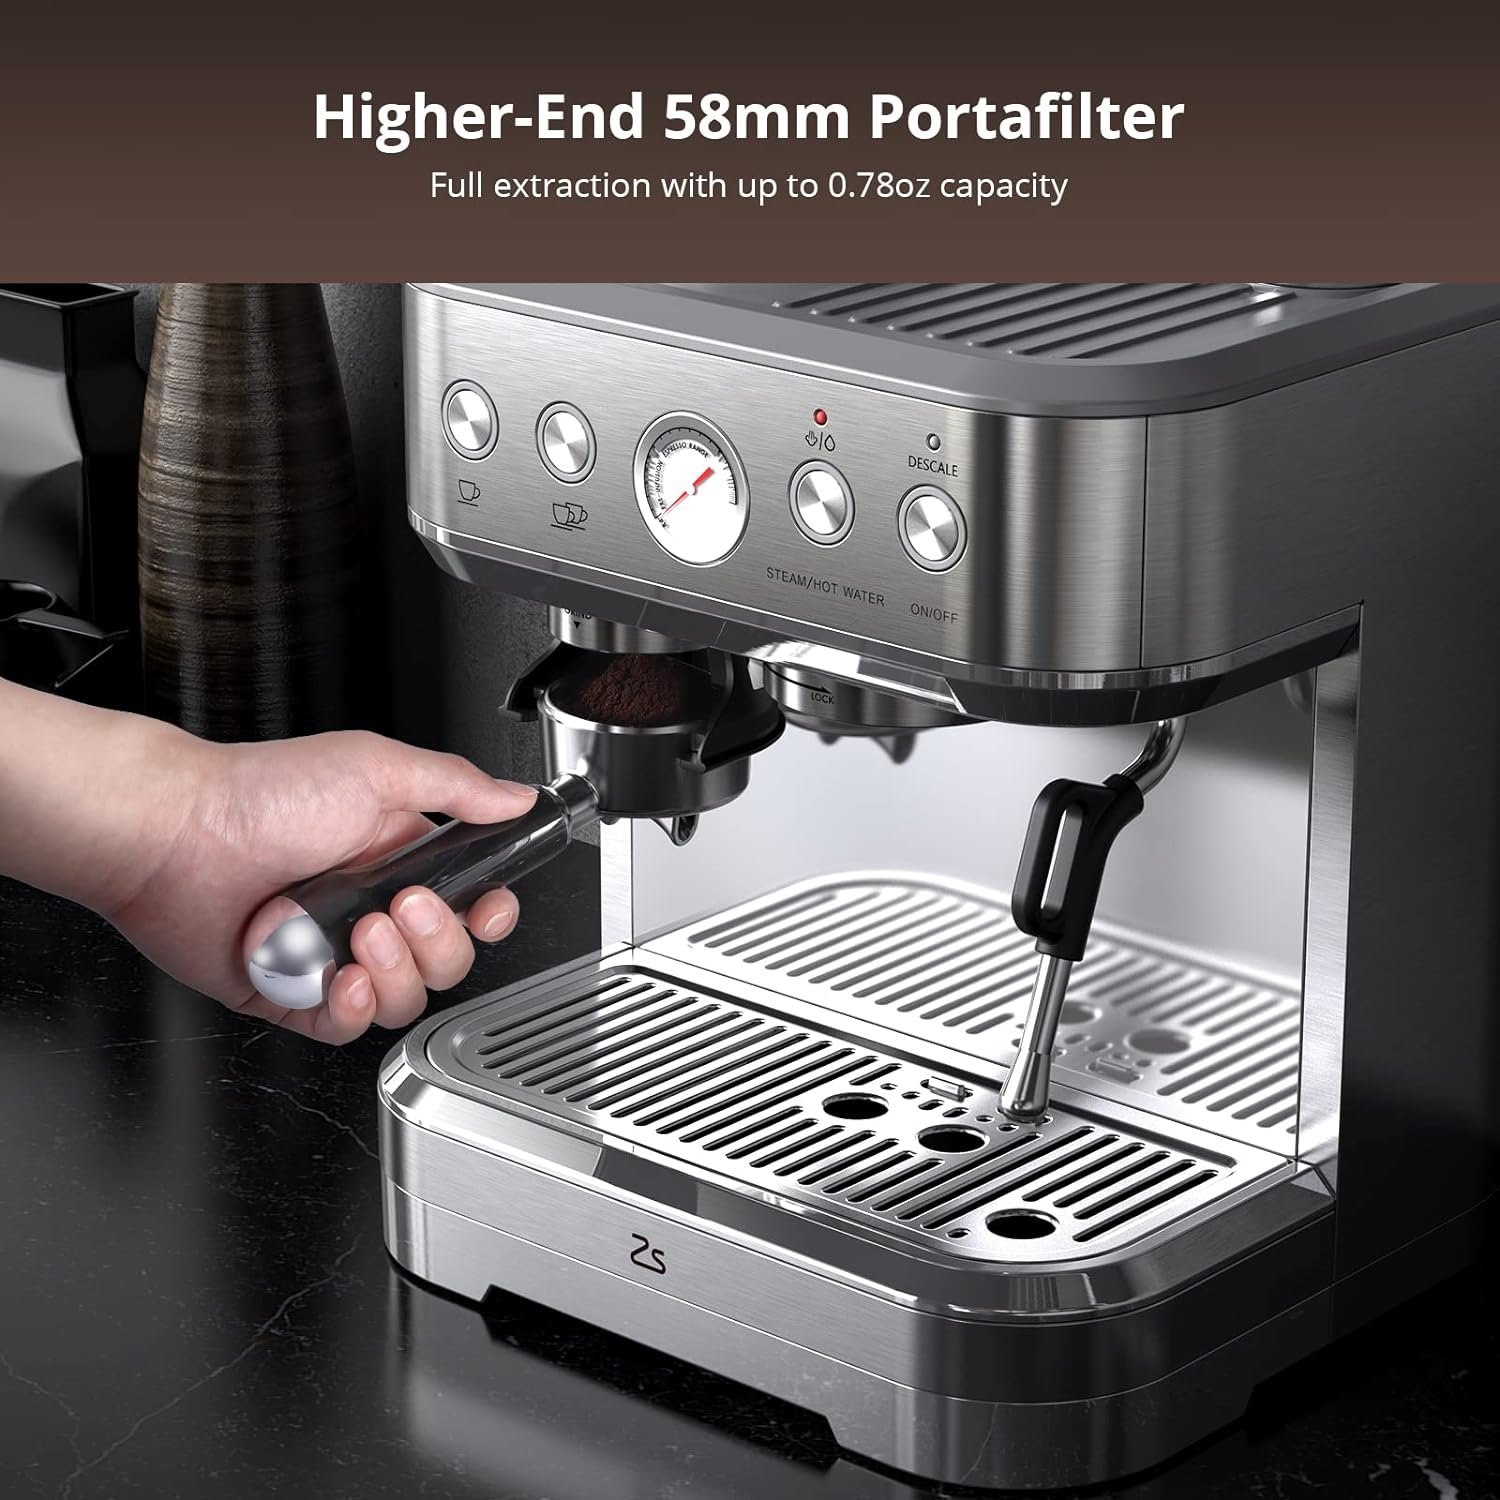 Zstar Espresso Machine with Grinder, Upgraded 15 Bar Automatic Espresso Coffee Maker with Milk Frother for Cappuccino Latte